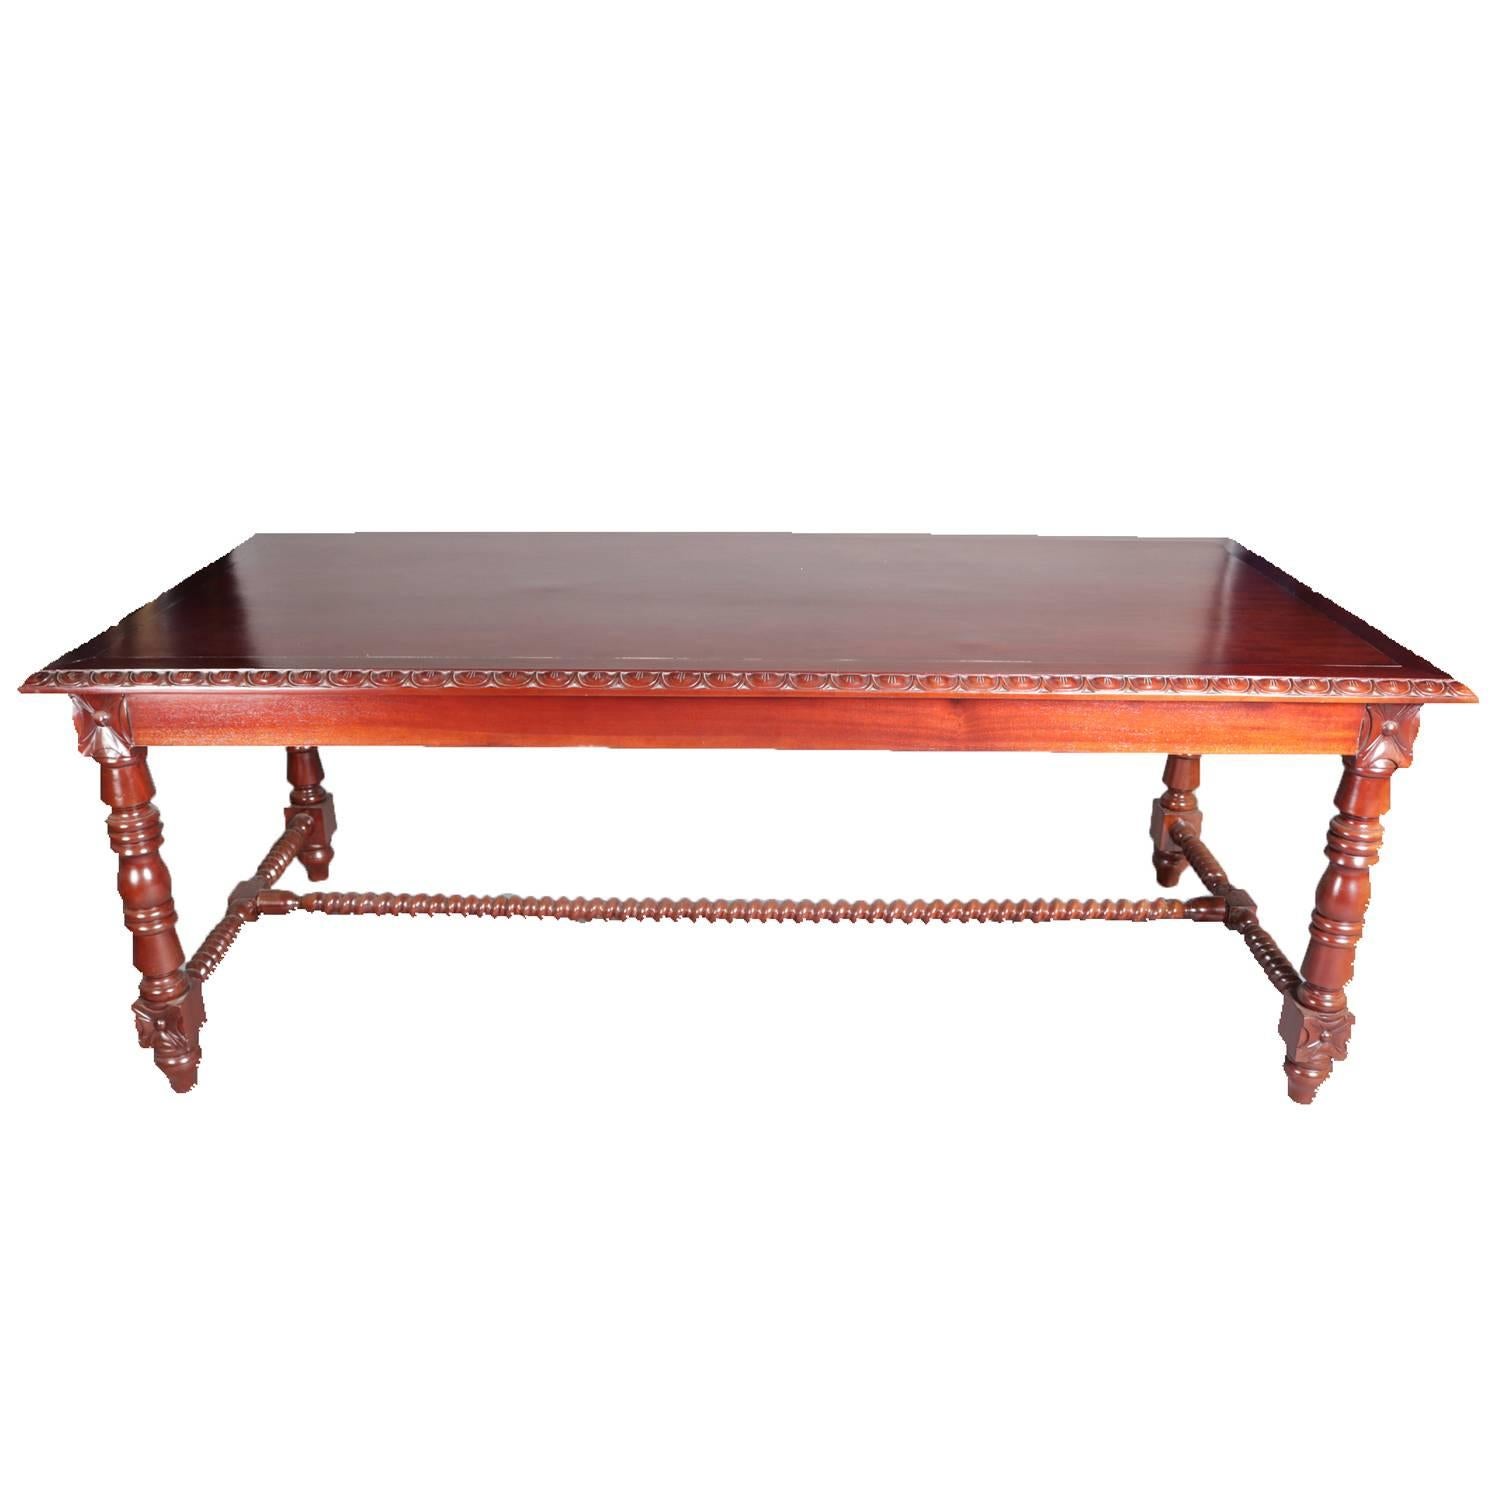 French style carved mahogany dining, conference or library table features egg-and-dart trimmed top above a deep apron and raised on rosette jointed turned legs connected with H-form barley twist stretcher, 20th century


Measures: 30